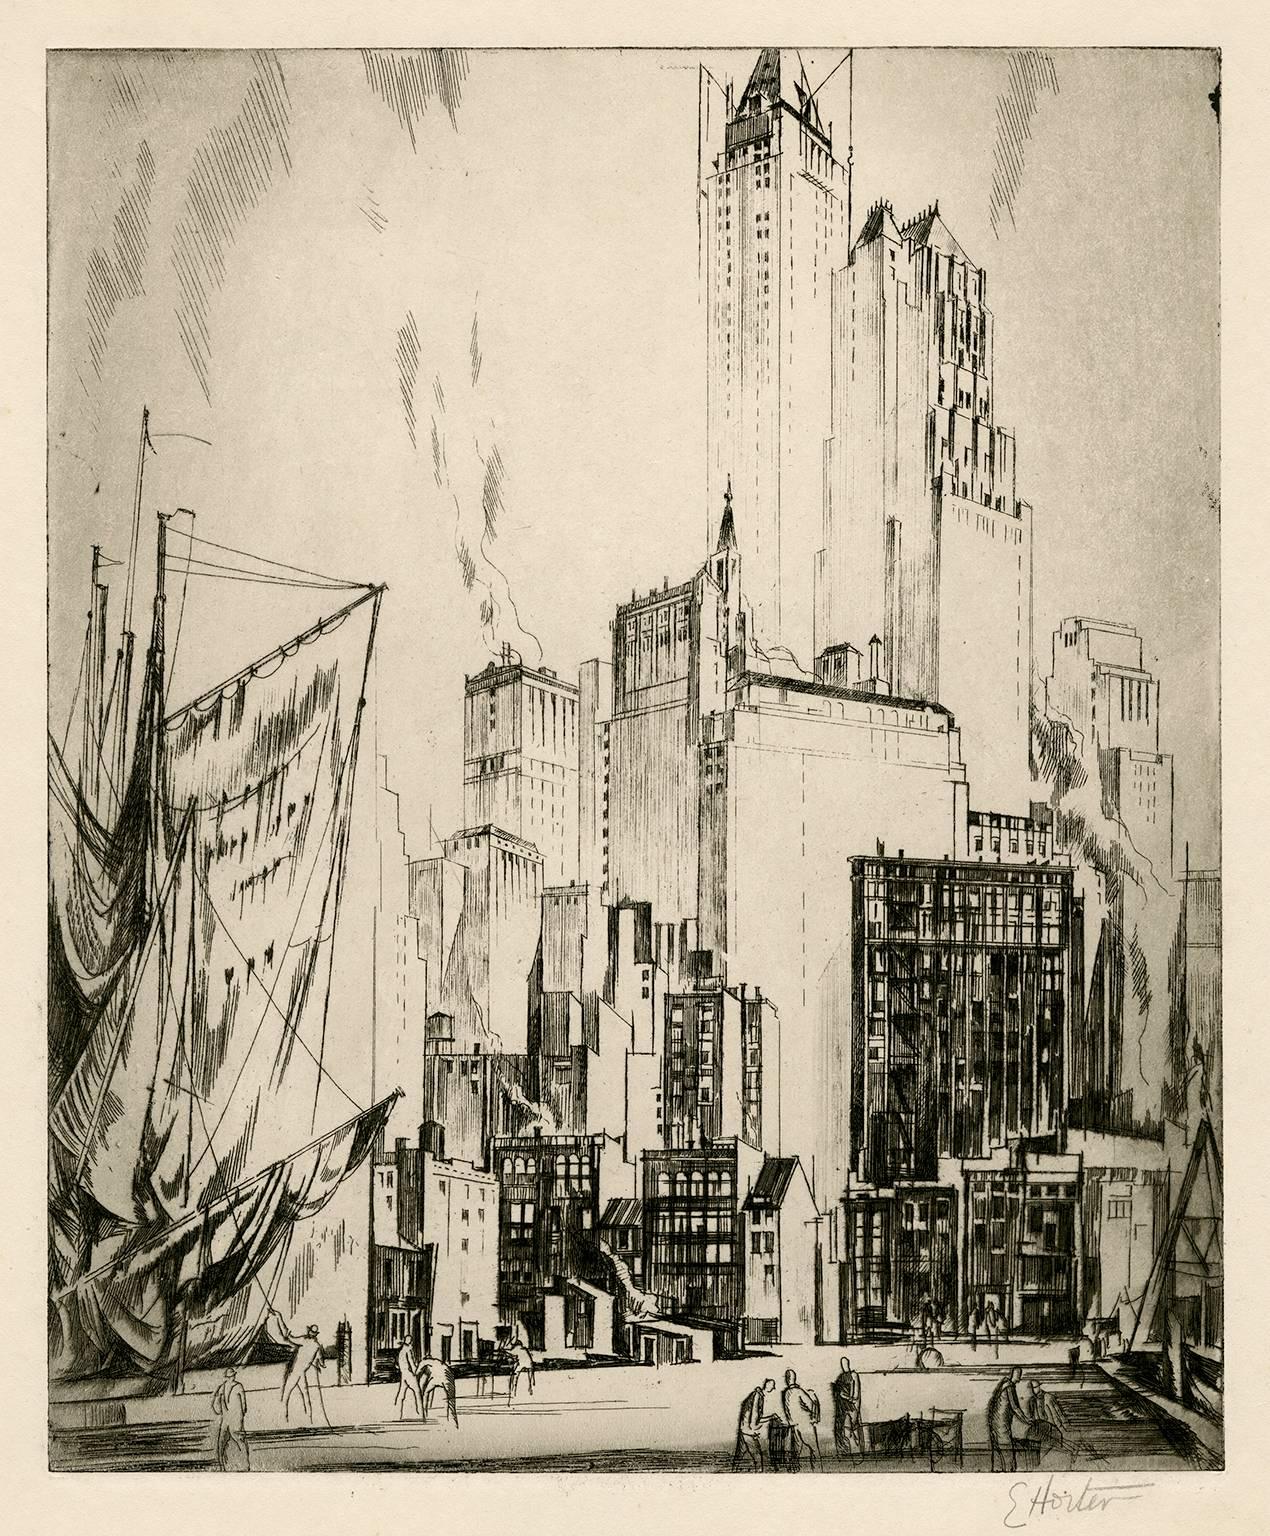 Earl Horter Landscape Print - 'Woolworth Building Under Construction' — Early 20th Century Modernism